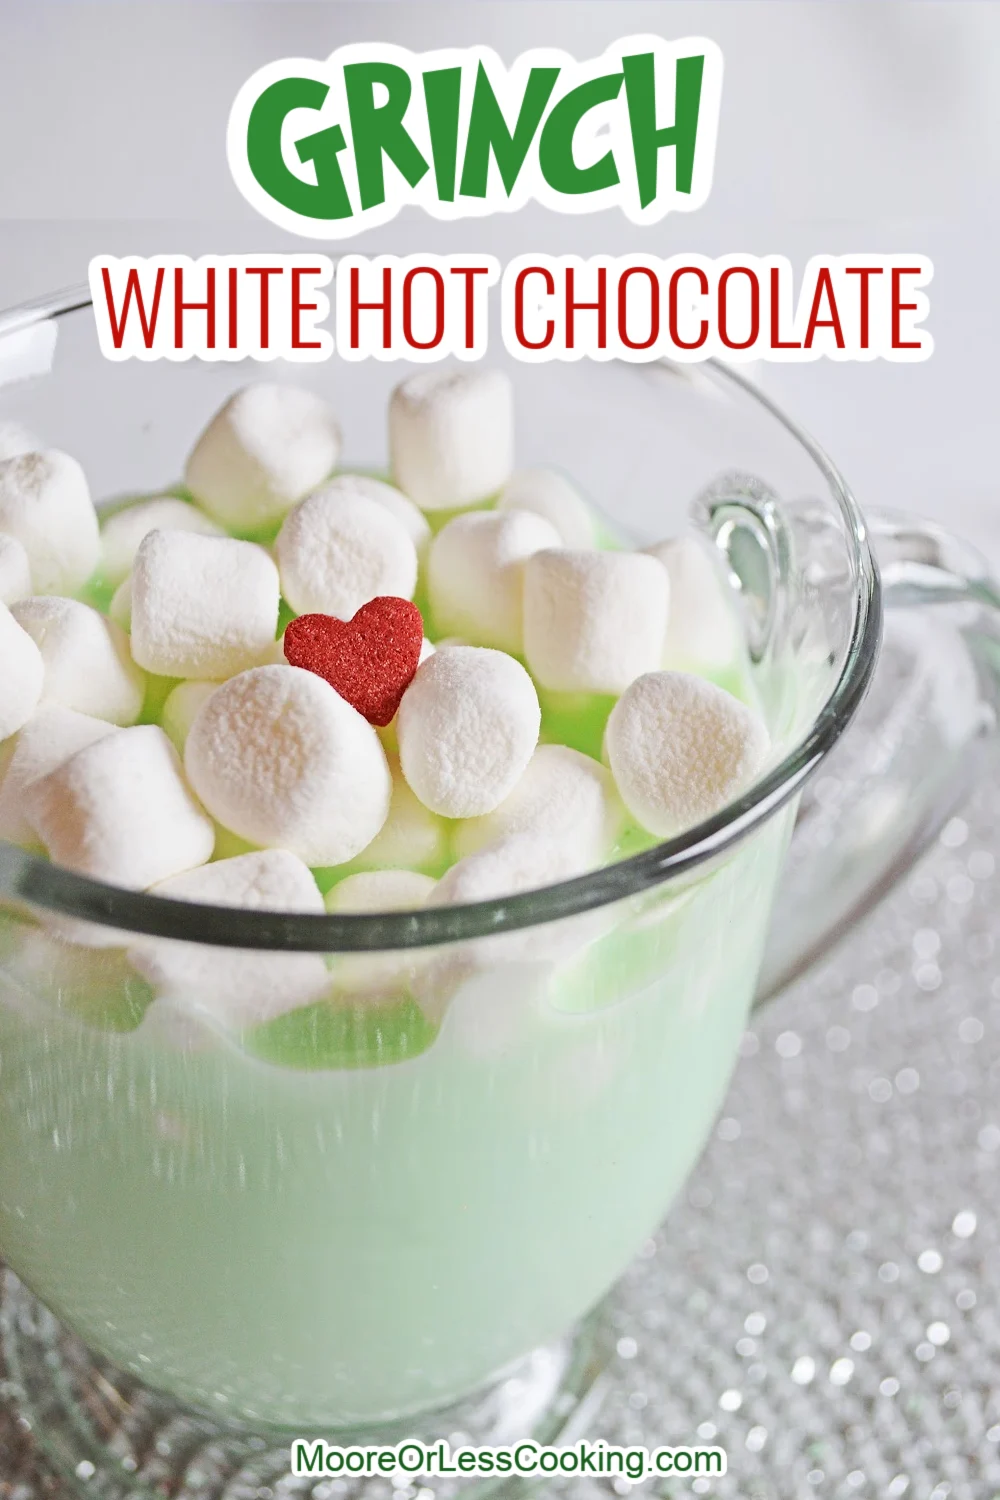 Creamy and delicious, this Grinch White Hot Chocolate recipe is a festive way to kick off the season. Cradle a cup of this warm and cozy green beverage while you watch your favorite Christmas movies. via @Mooreorlesscook